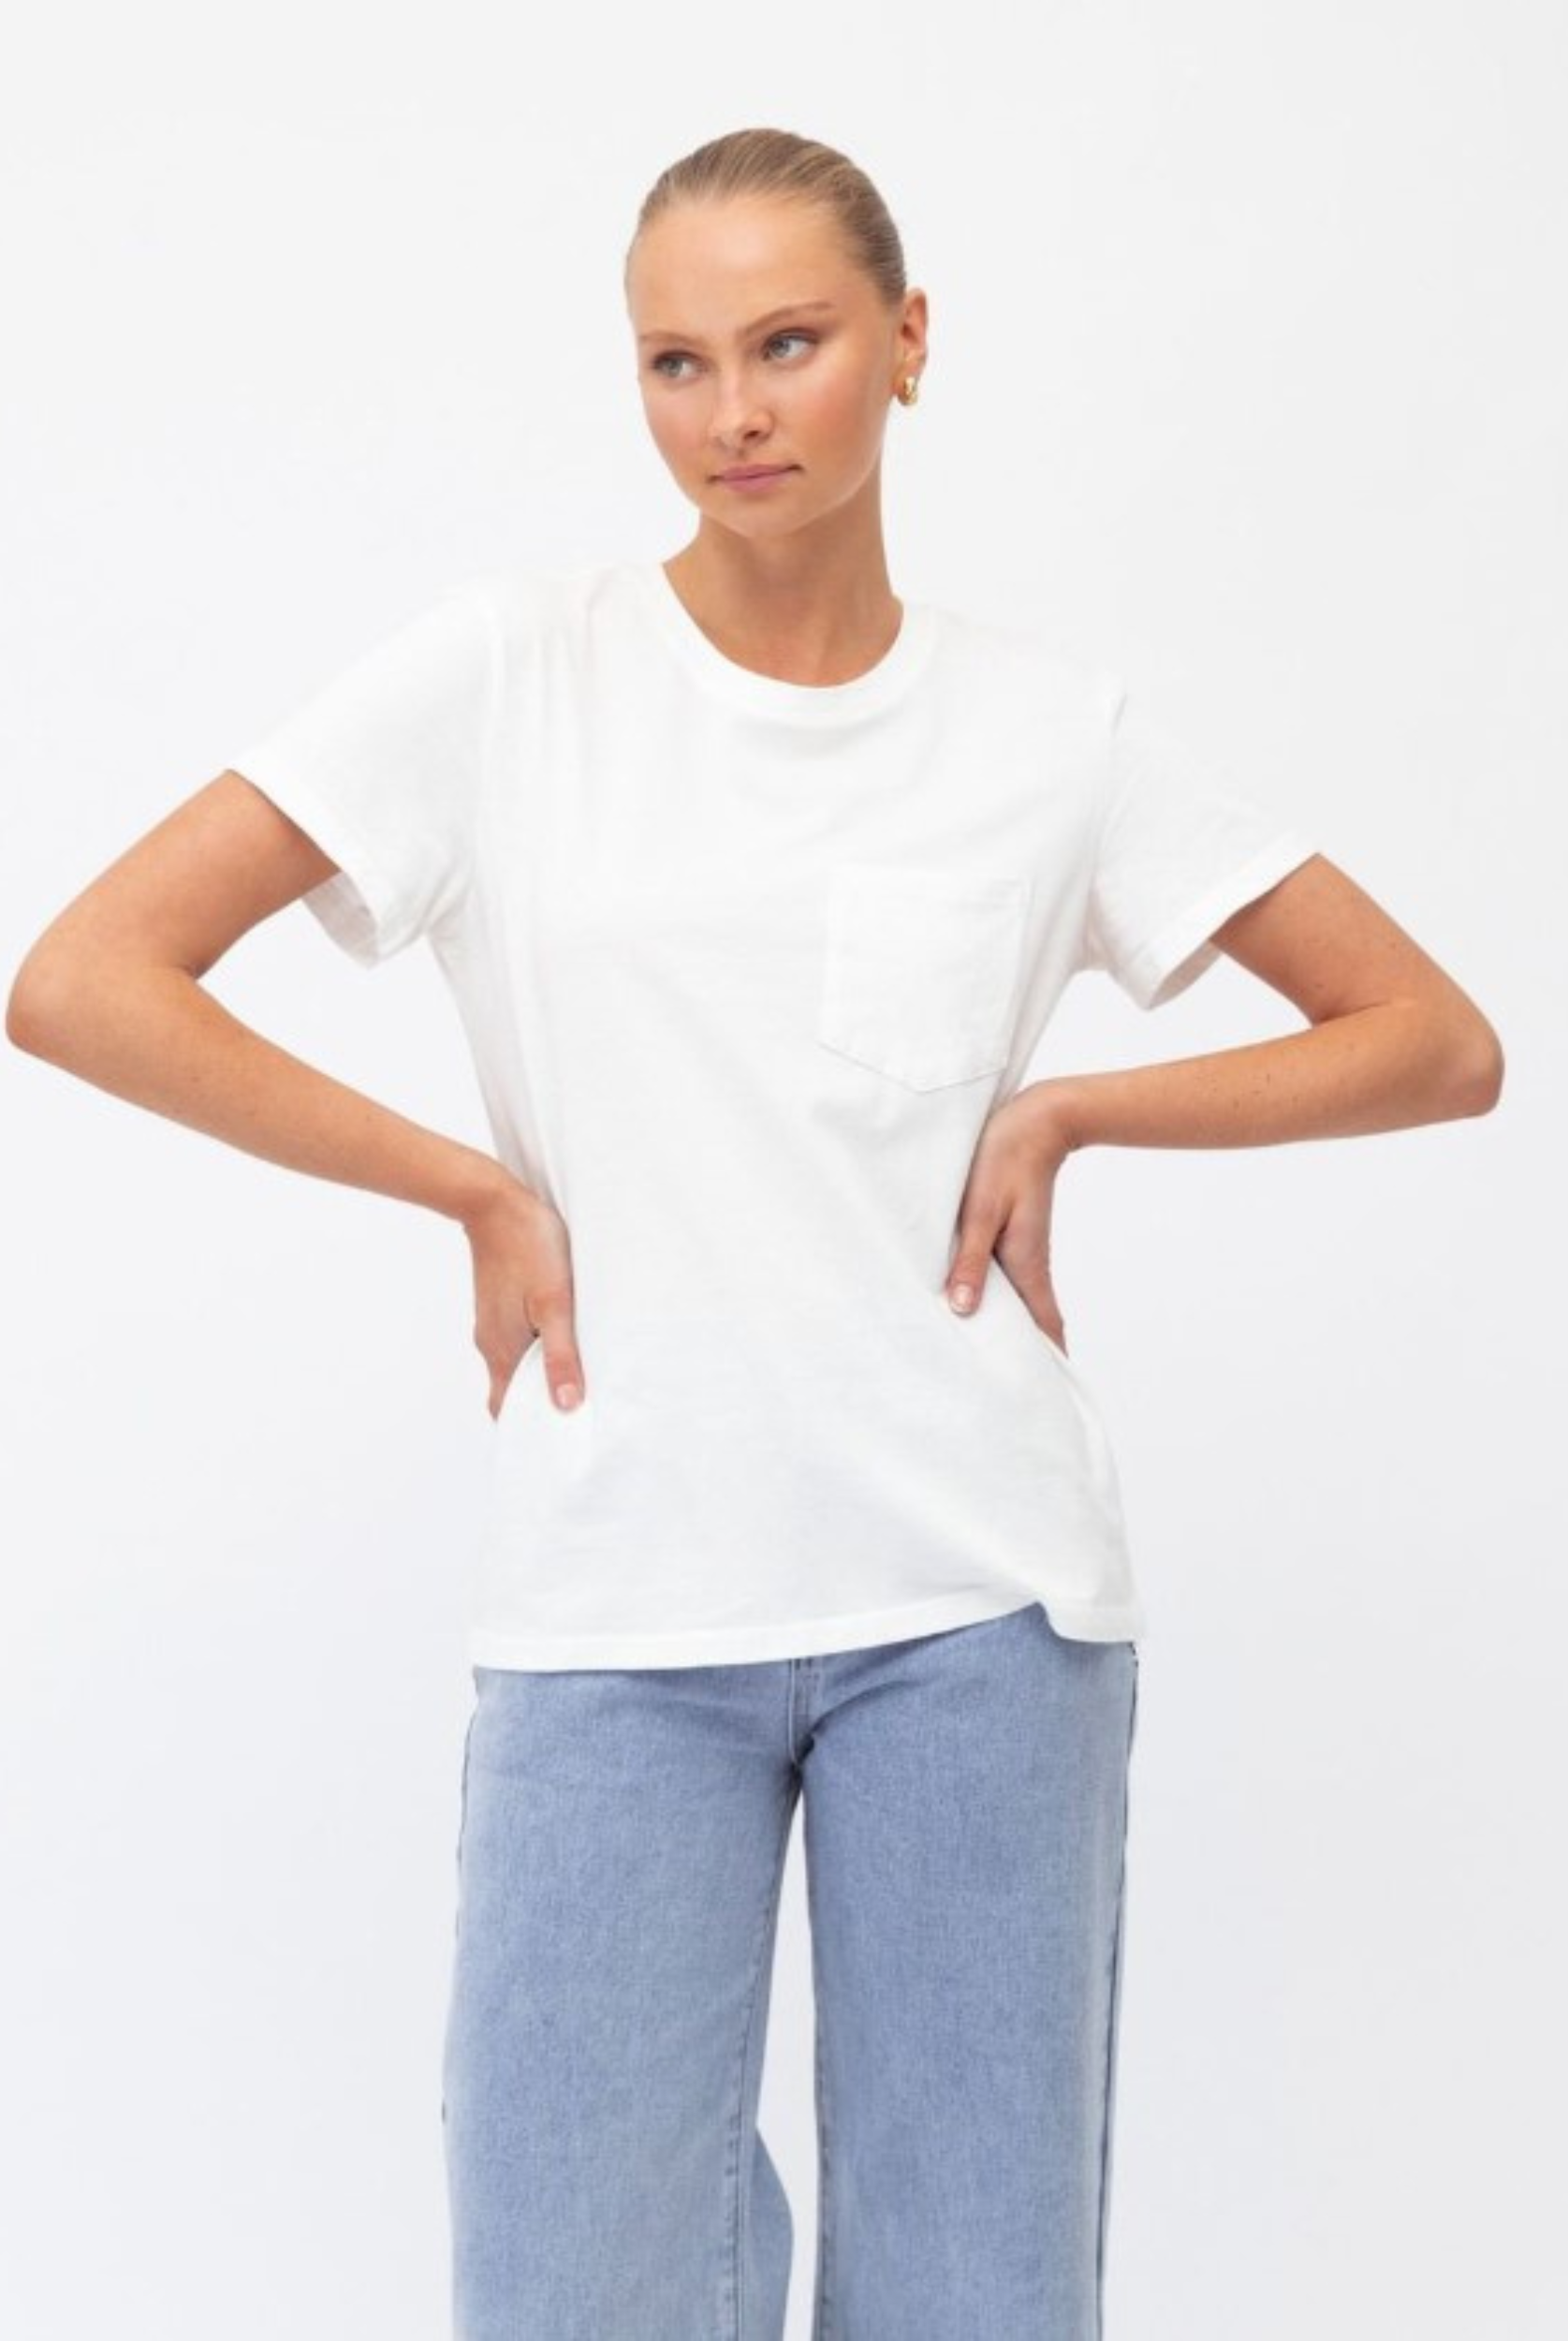 White tee with pocket detail on front from Paper Heart